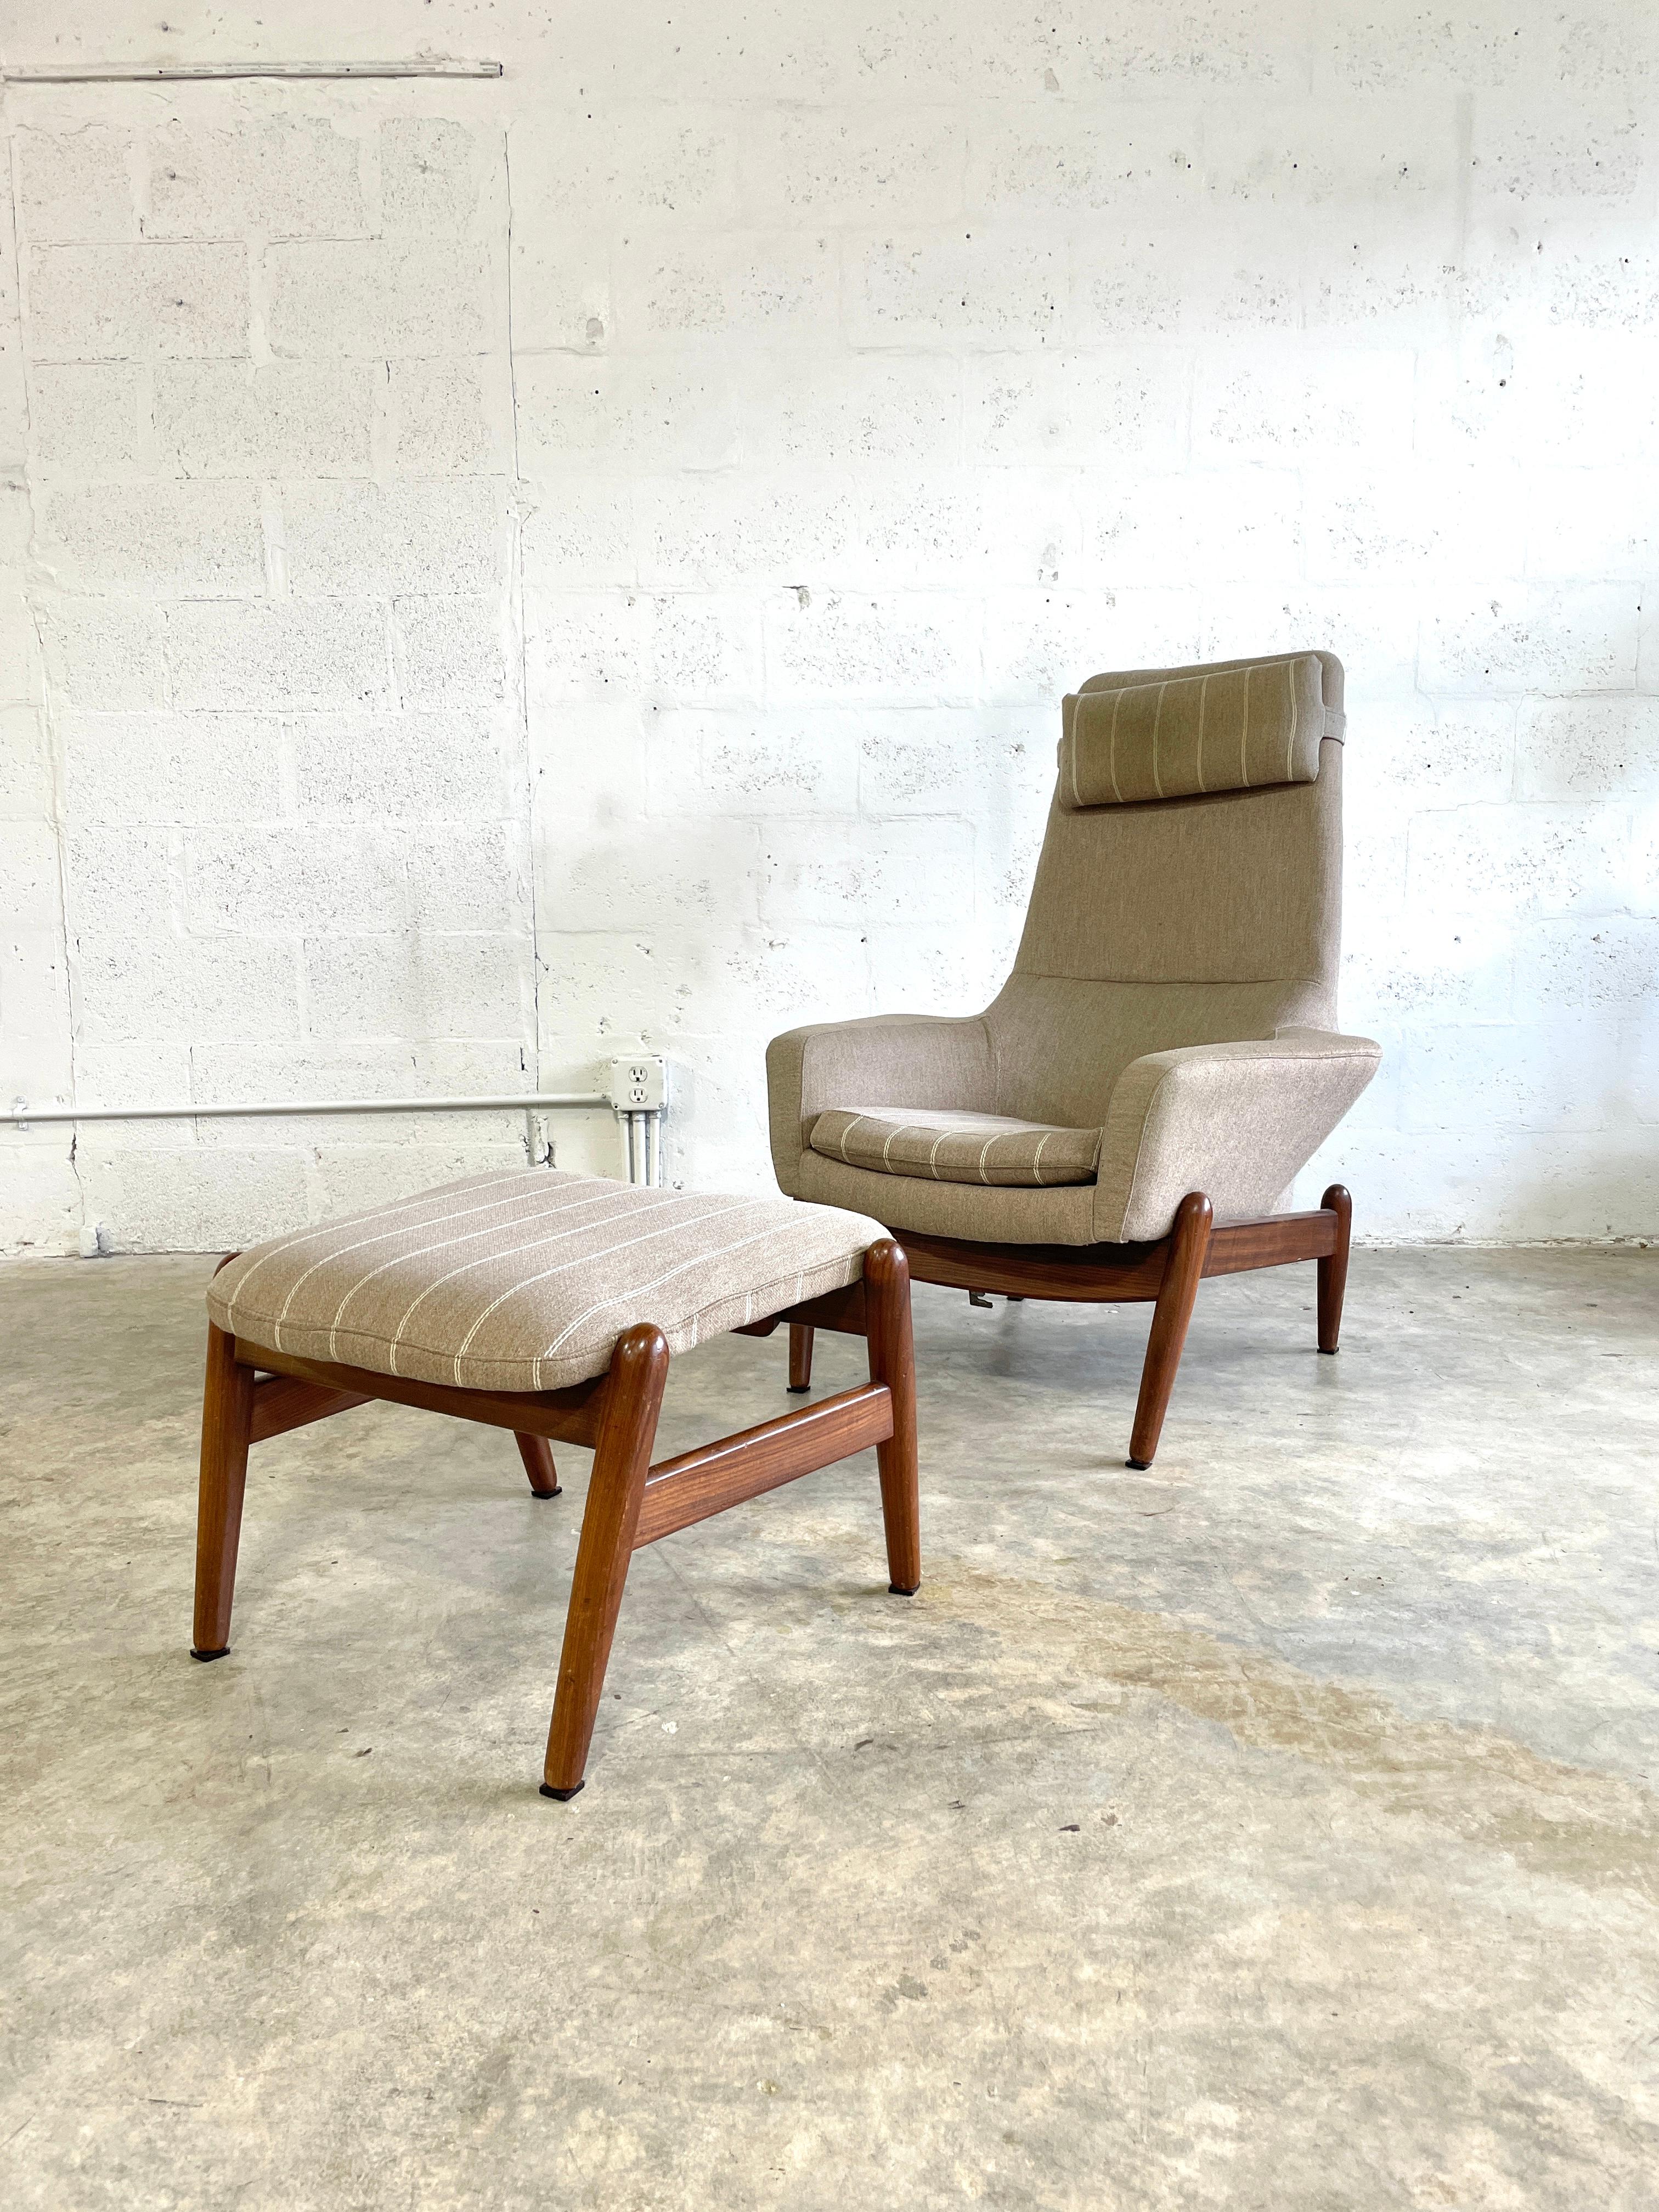 Rare Arnold Madsen and Schubell MS20 Highback Lounge Chair Recliner and Ottoman. Chair reclines to other positions or locks in place. Ottoman is also adjustable. Made in Denmark. Original fabric. 31w 30d 41h 16seat / otto 24w 16h 20d
